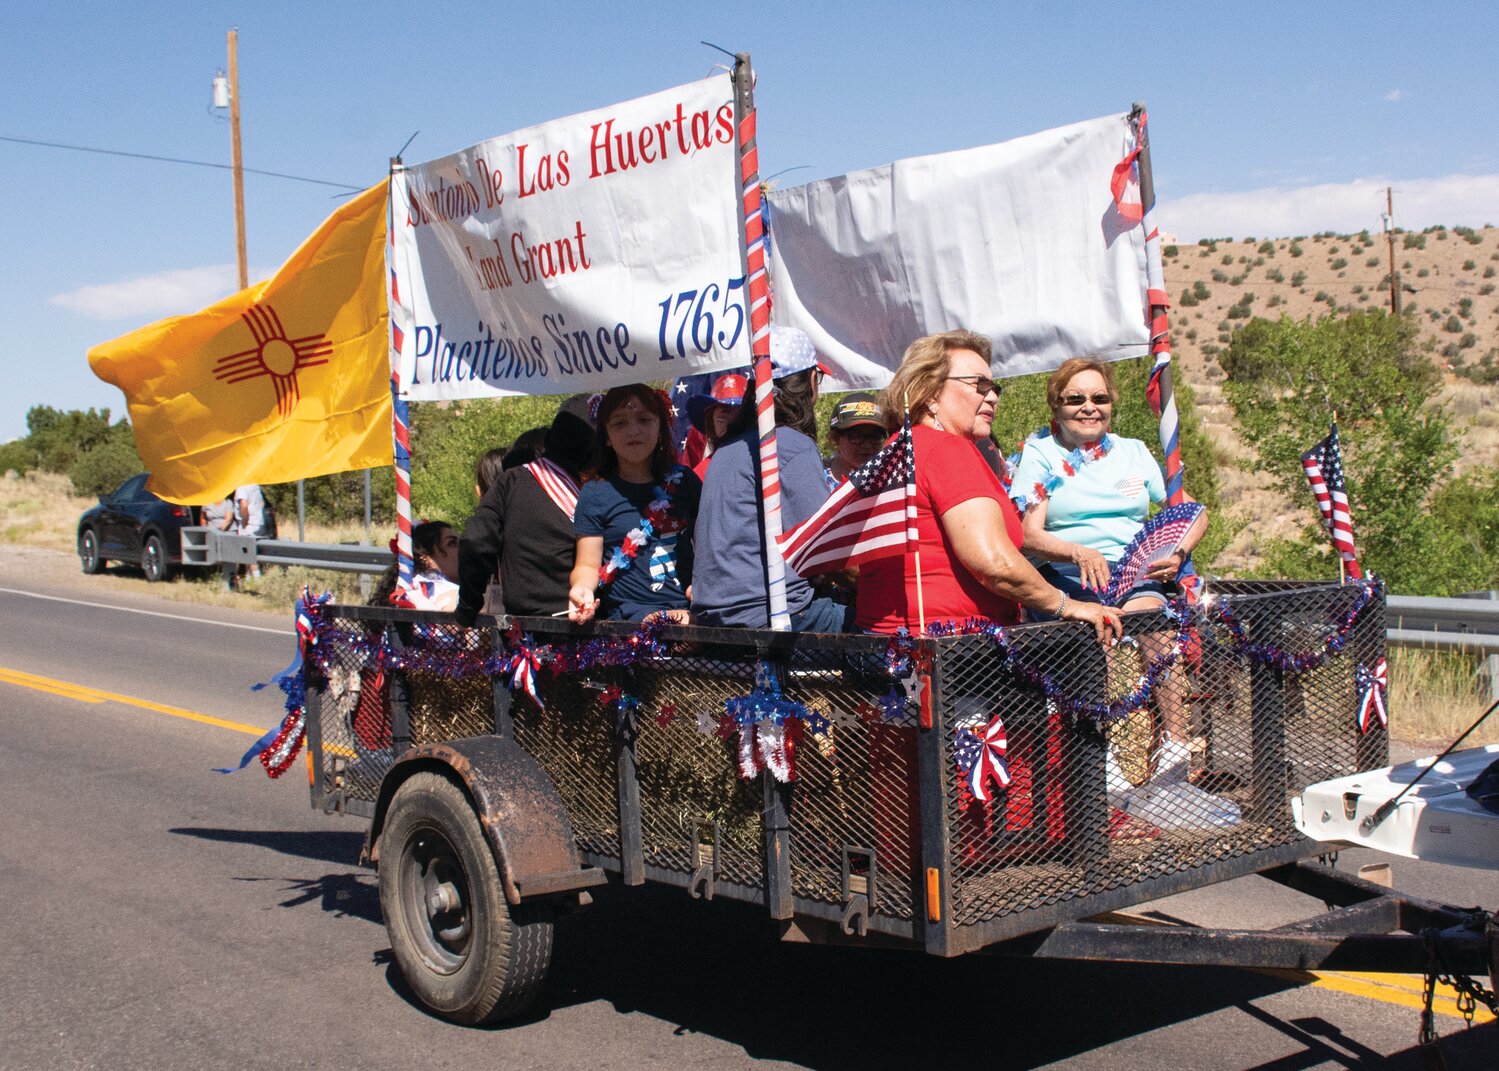 Processions in Placitas village are nothing new for the early settlers and now their heirs who keep alive the San Antonio de las Huertas Land Grant founded, as their banner shows, in 1765.